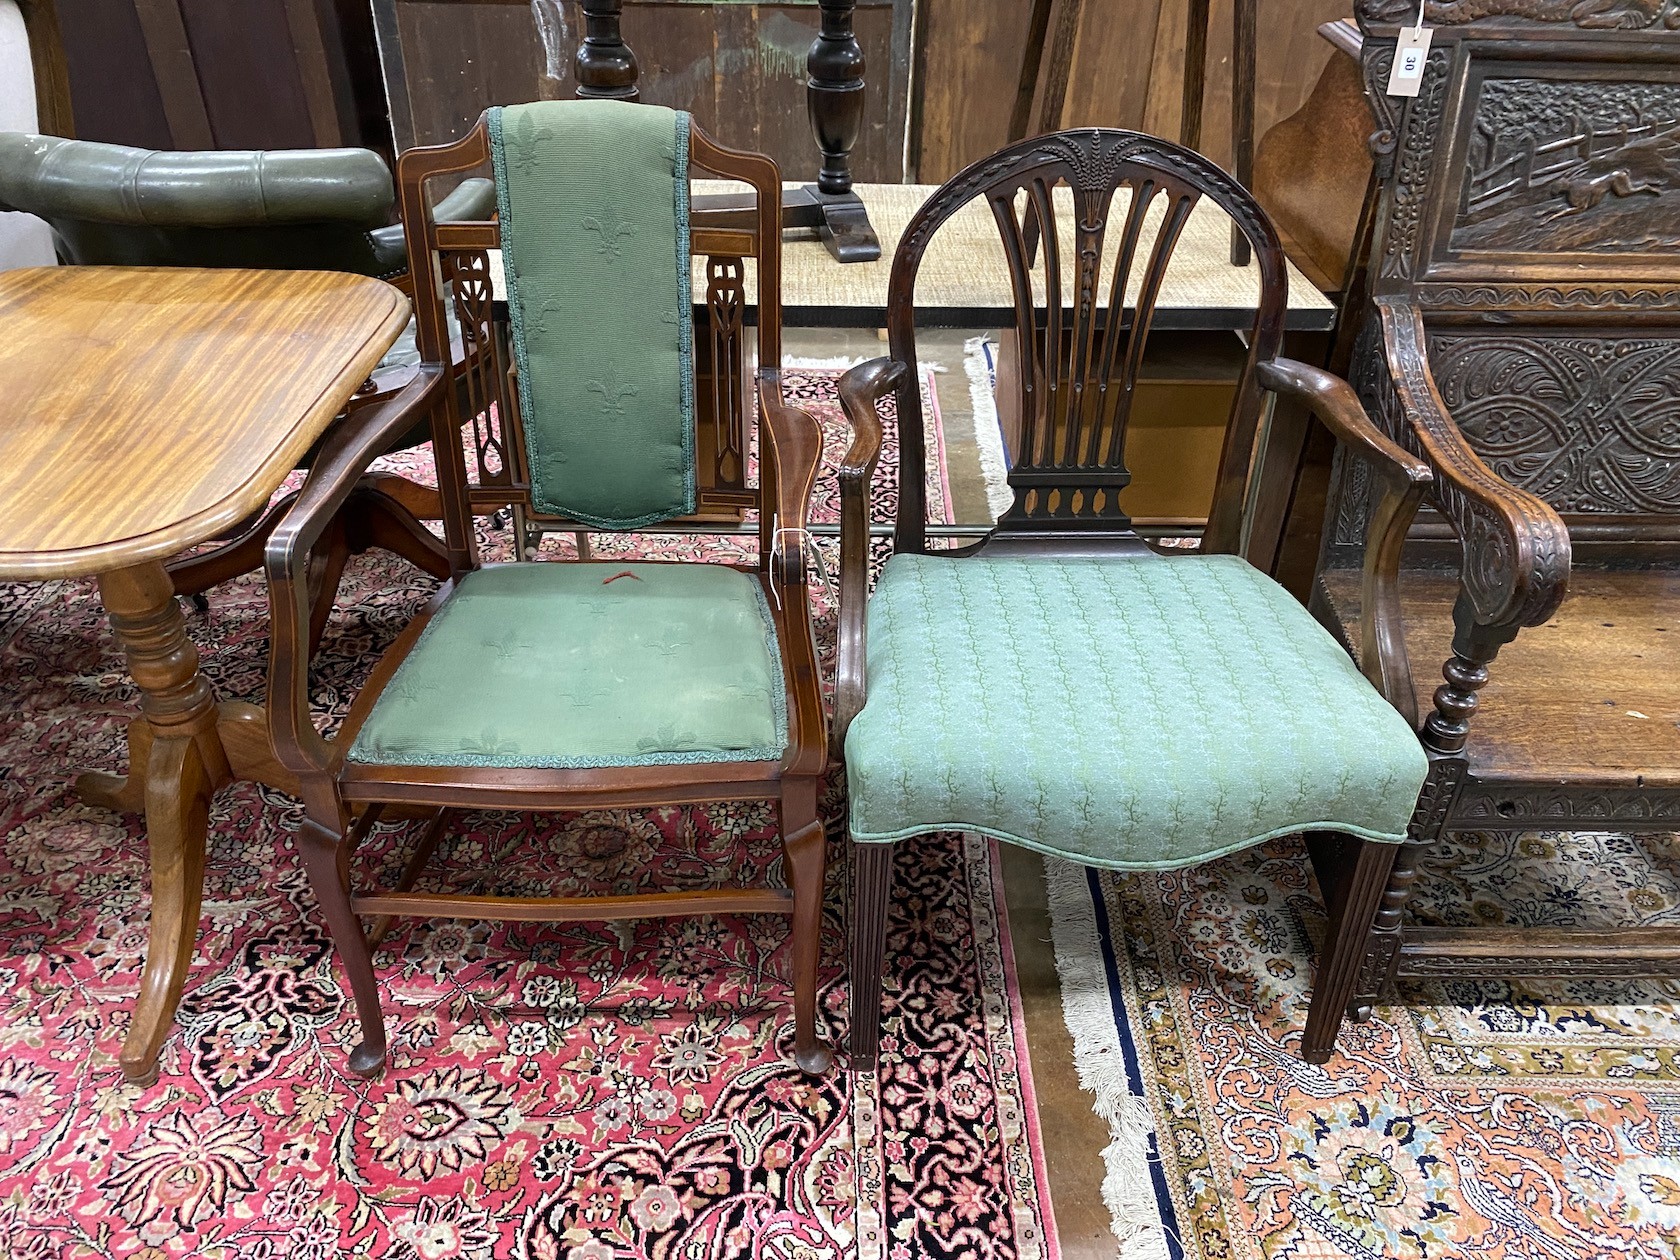 A George III mahogany inlaid elbow chair and an Edwardian mahogany elbow chair